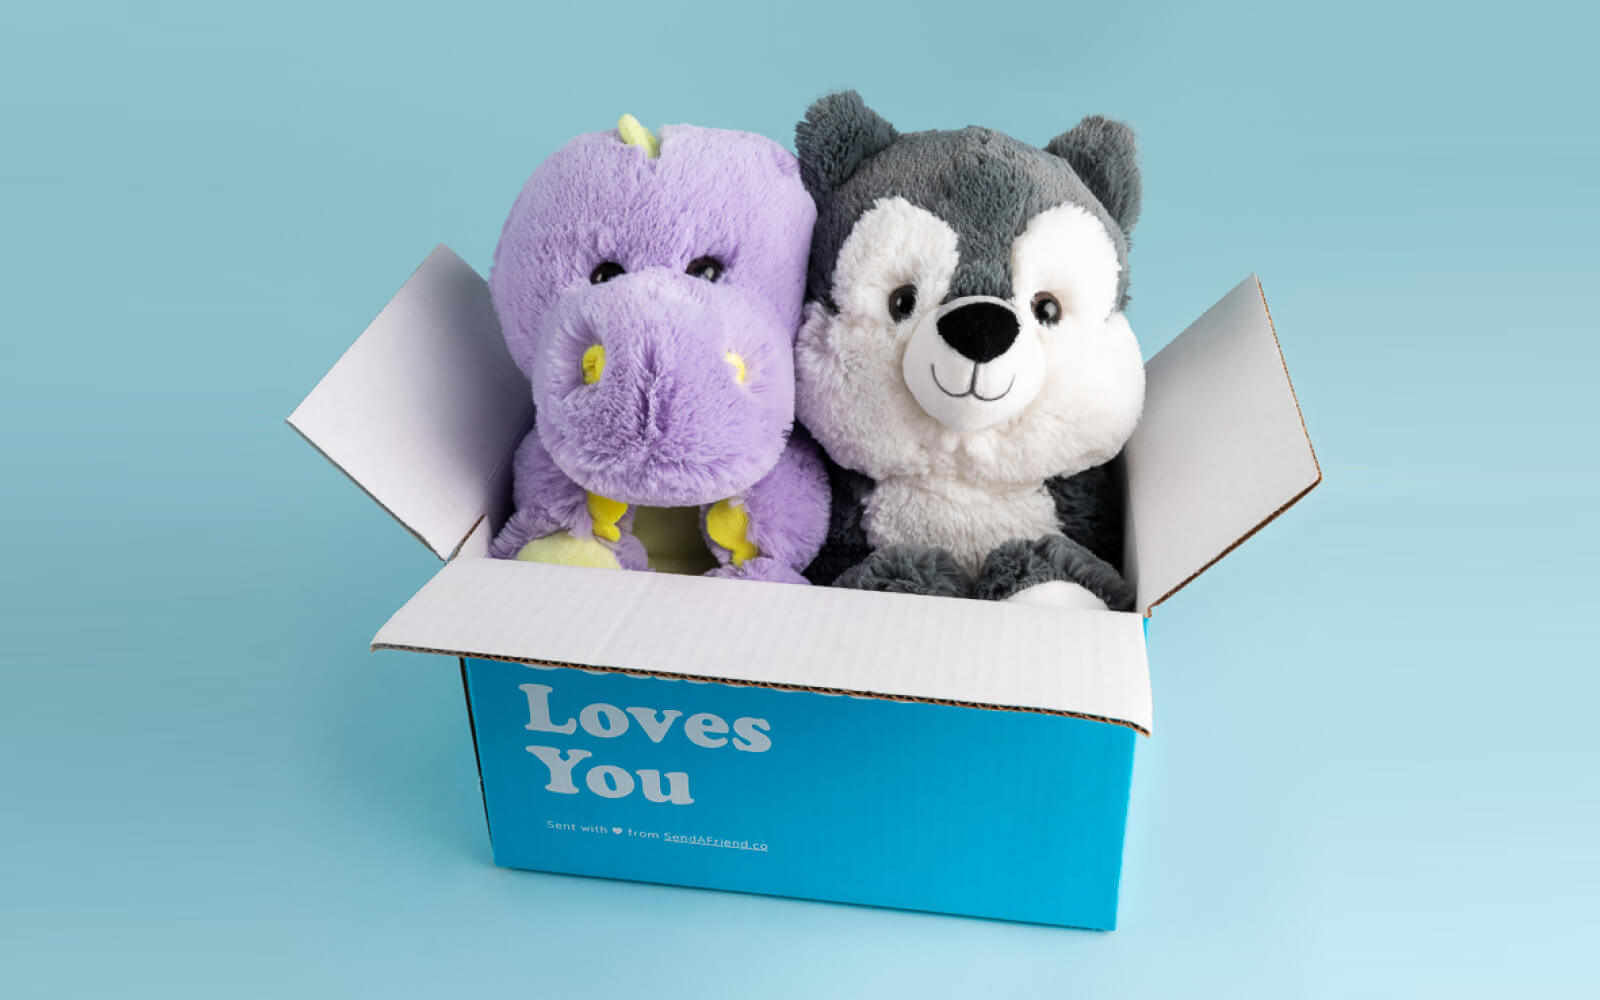 dexter the dino and winston the wolf stuffed animal in a "someone loves you" box